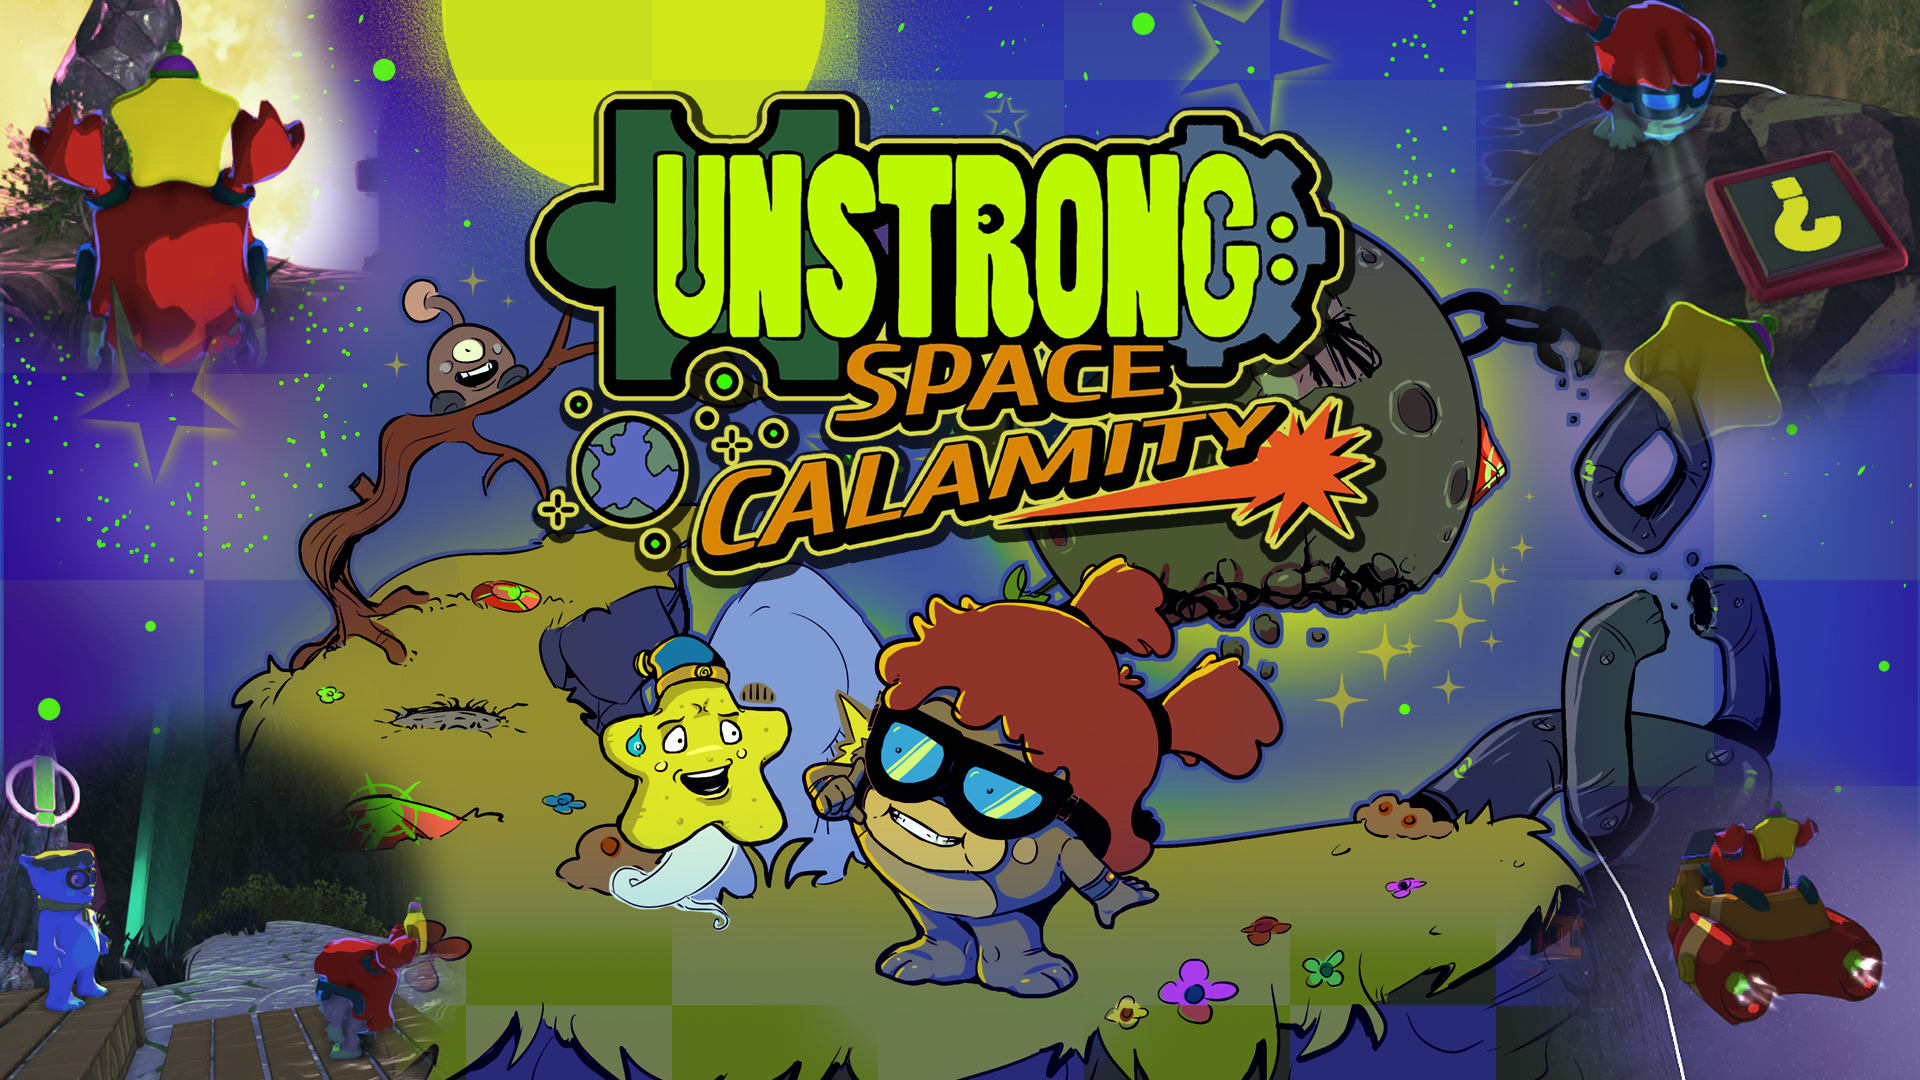 Unstrong: Space Calamity